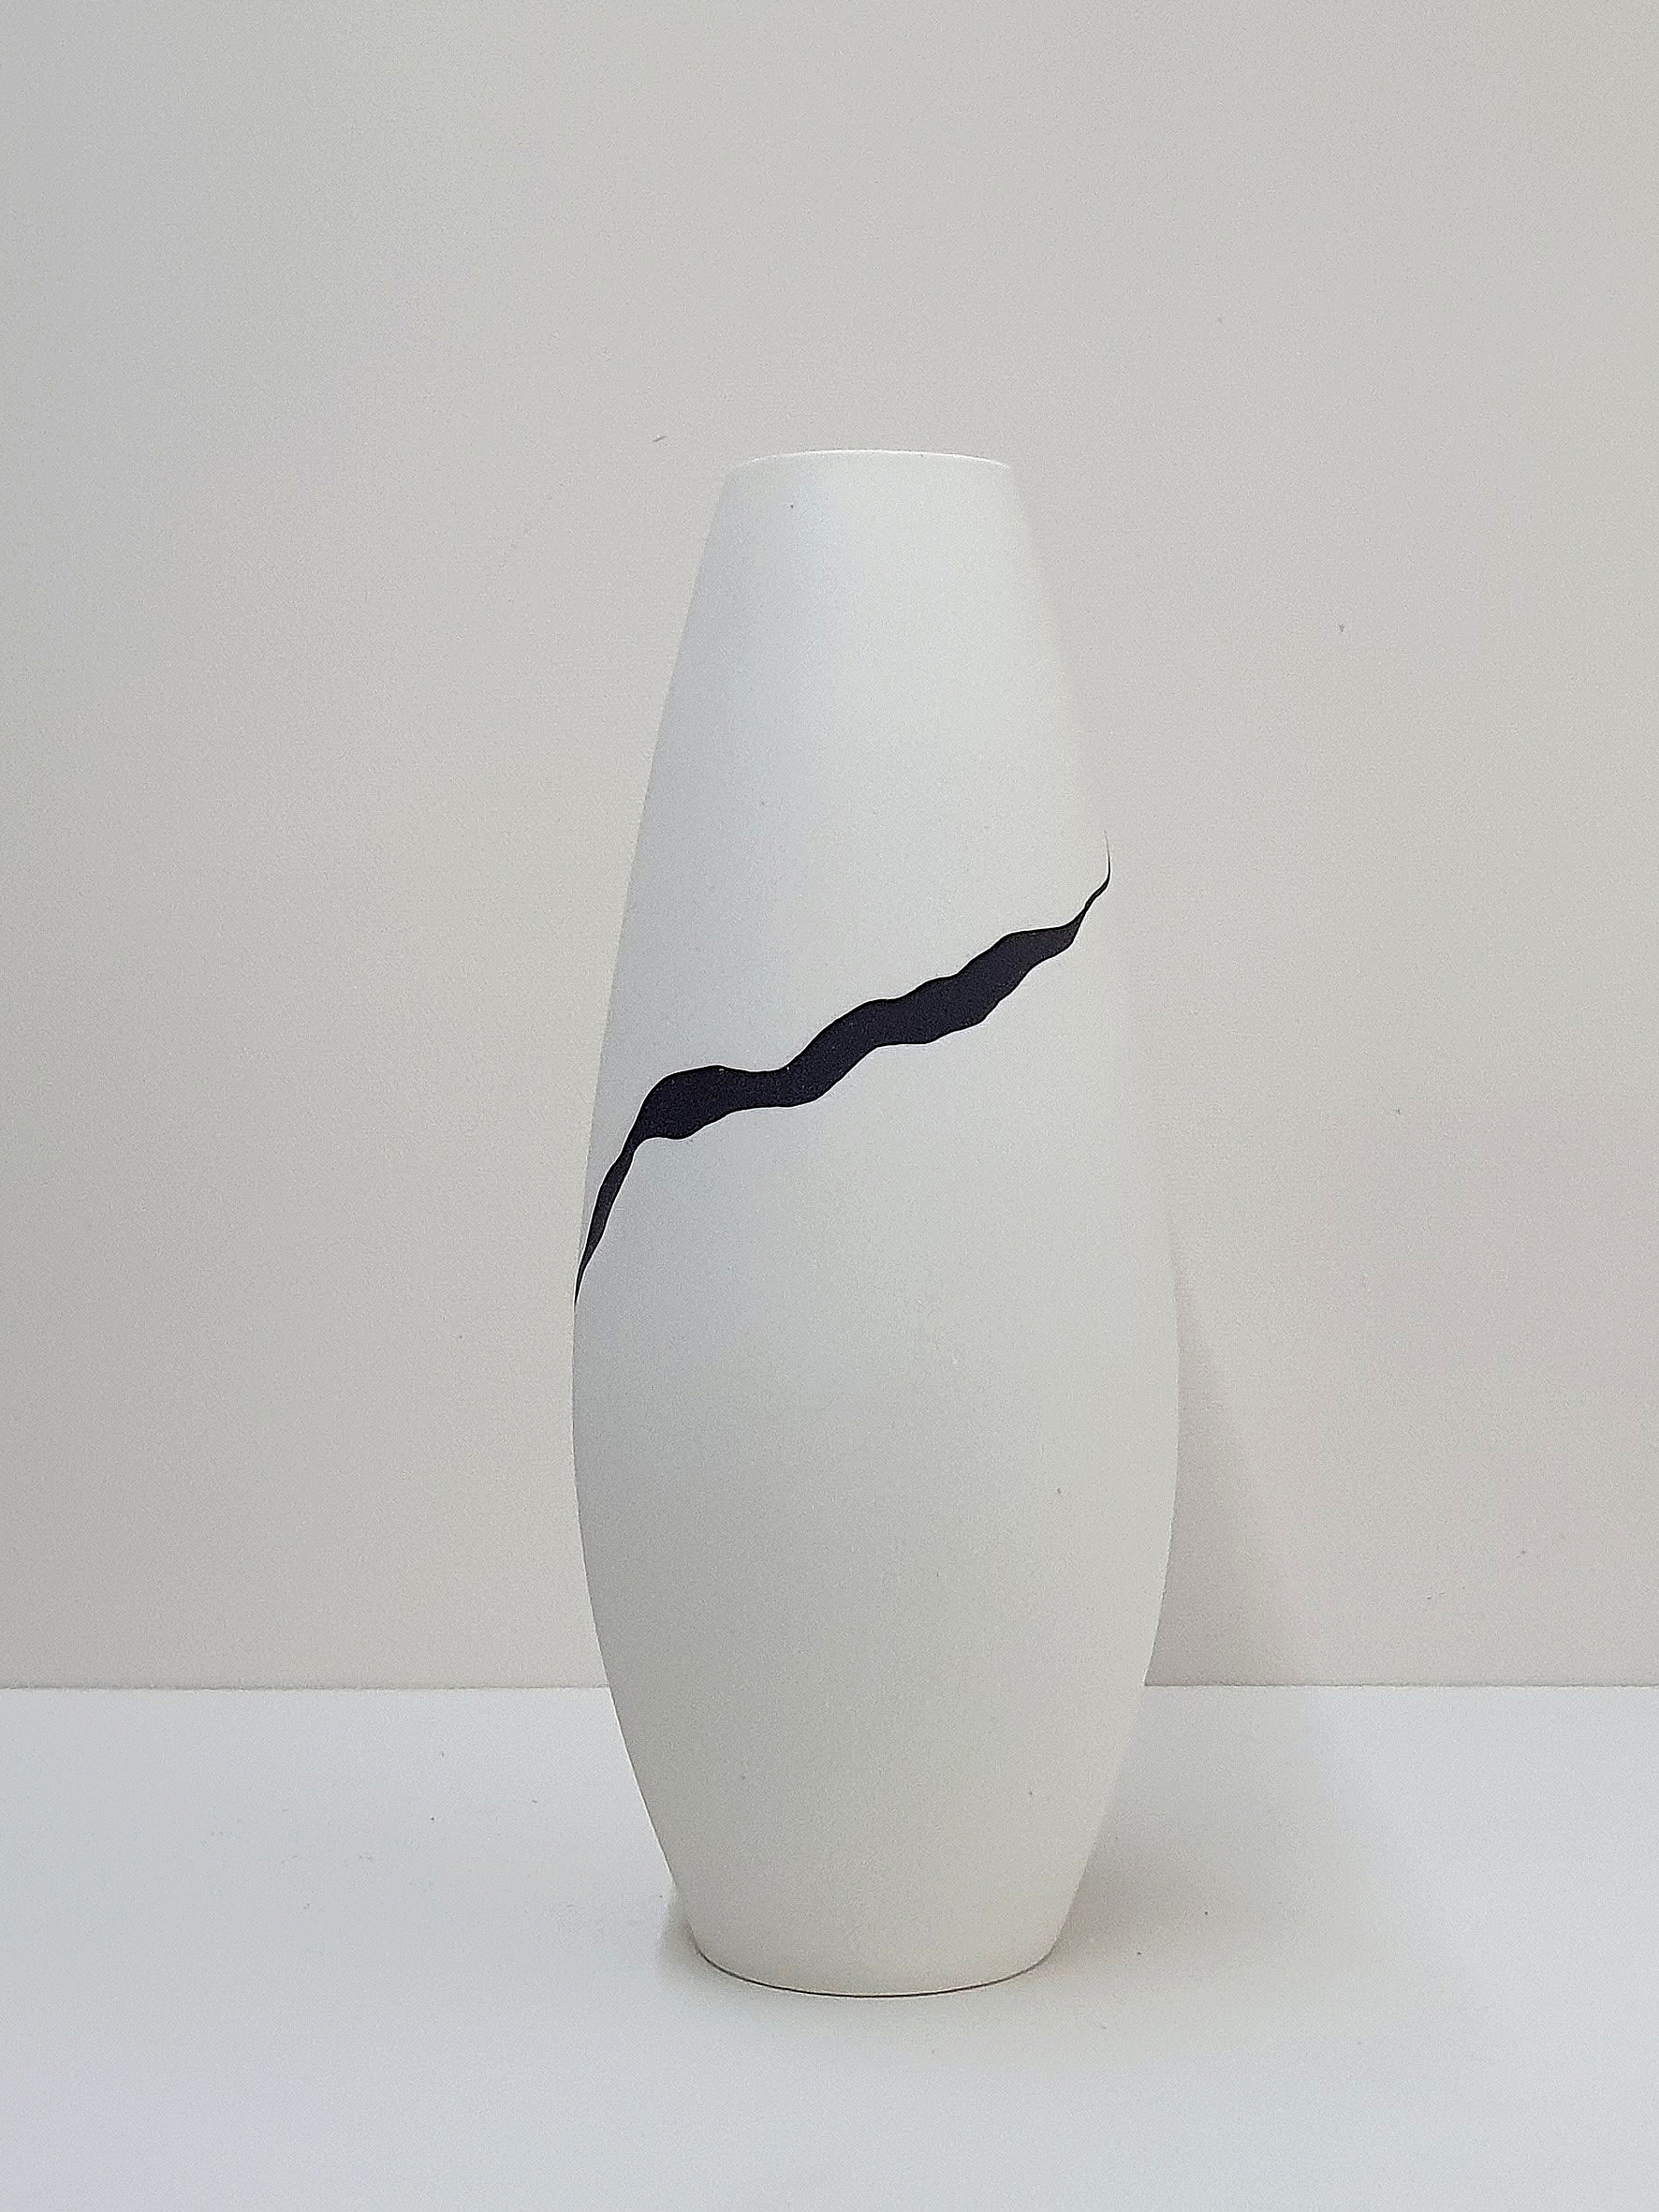 Leonie Rutter, Vessel 452 White tall wheel thrown porcelain vessel, inlaid with black ribbon £105